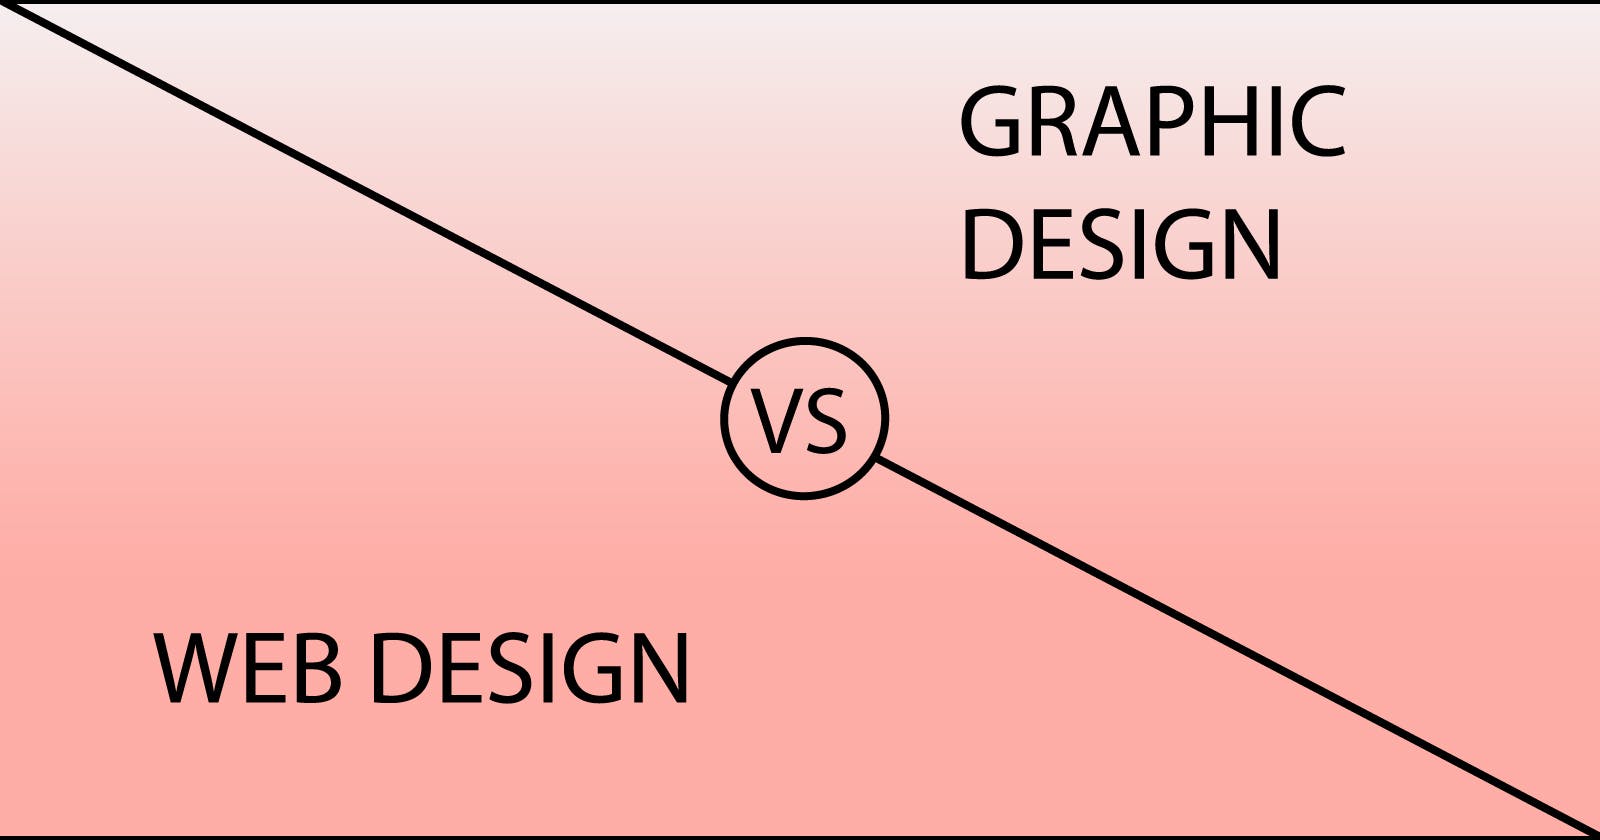 What is the difference between Web Design and Graphic Design?